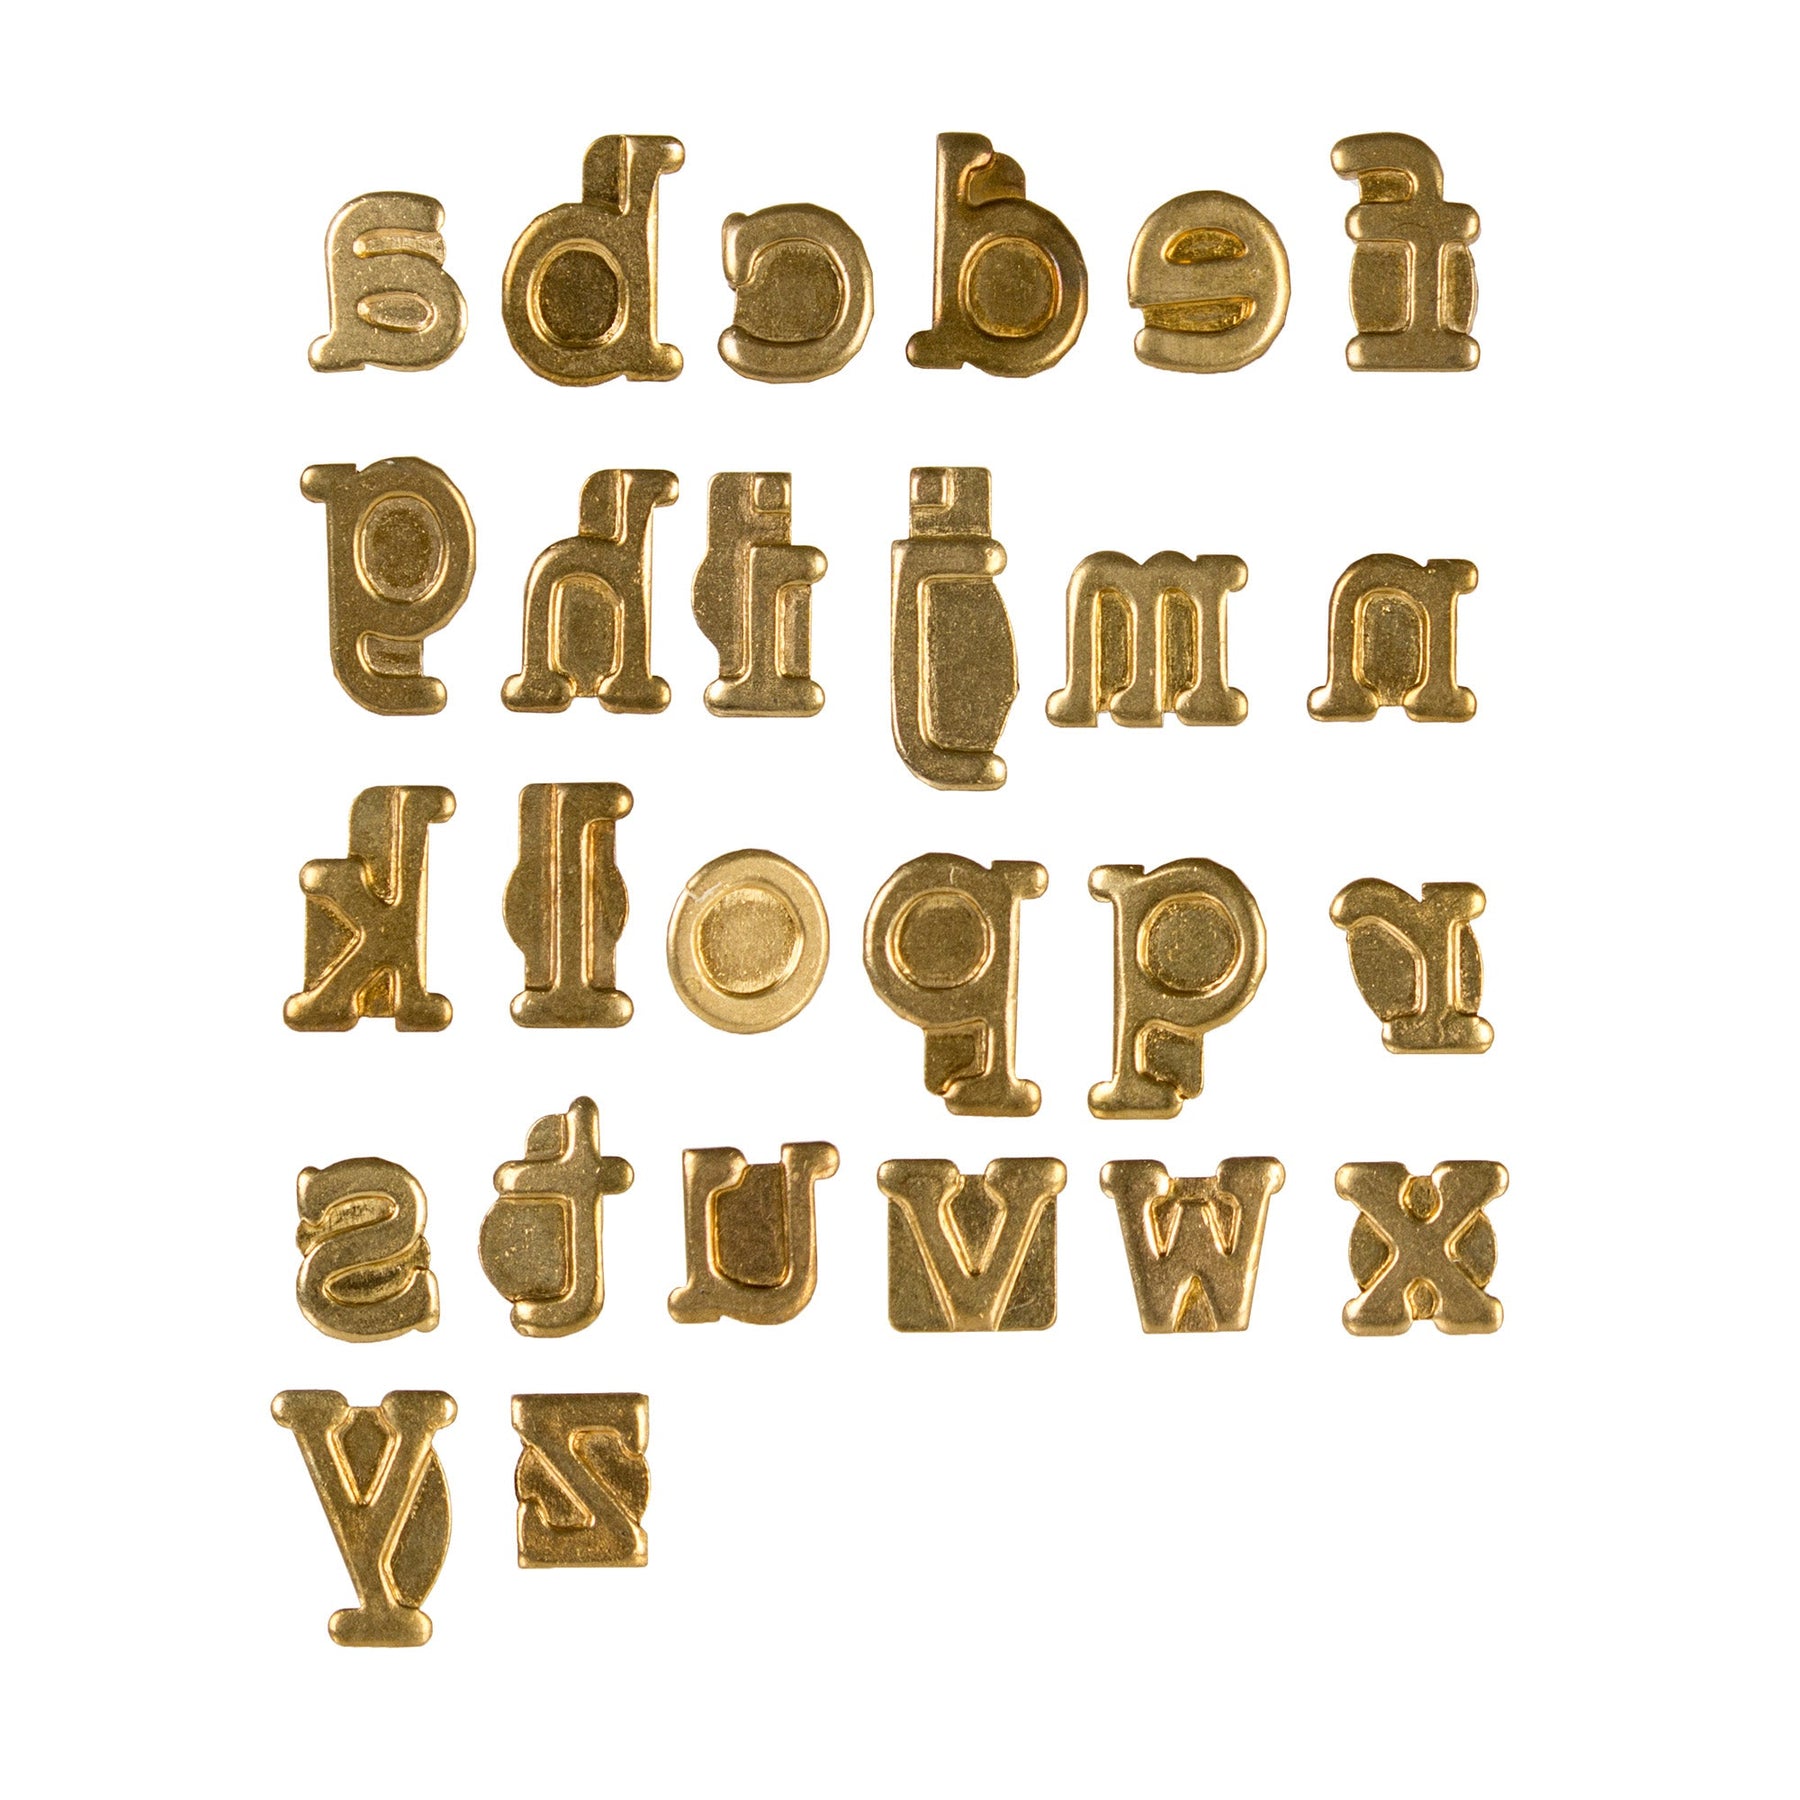 Lowercase Alphabet Wood Stamp Set by Recollections™